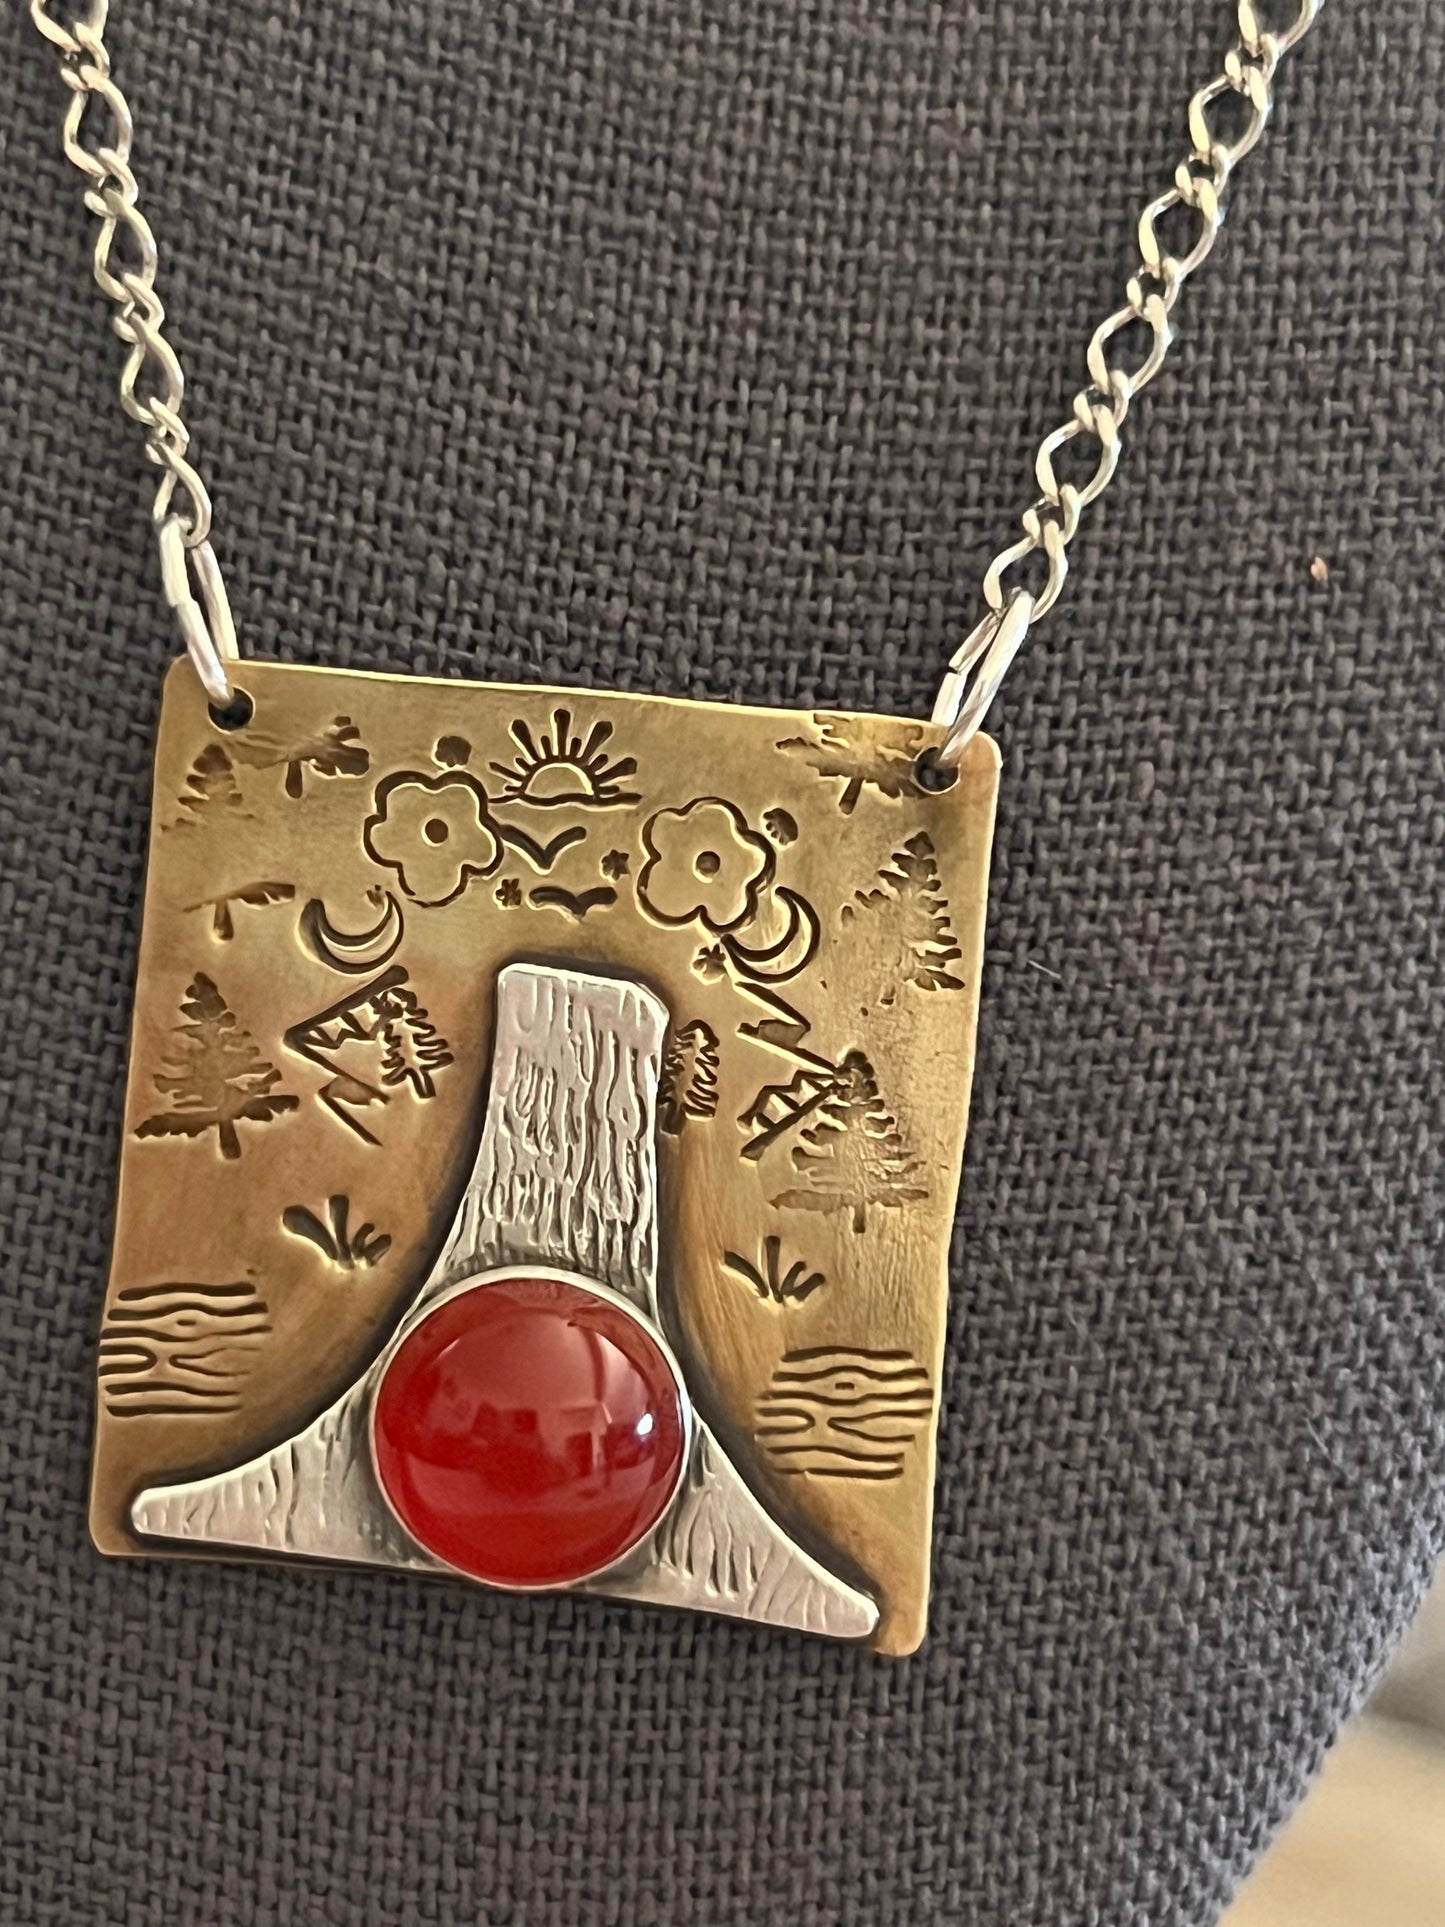 The apple doesn’t fall Carnelian necklace